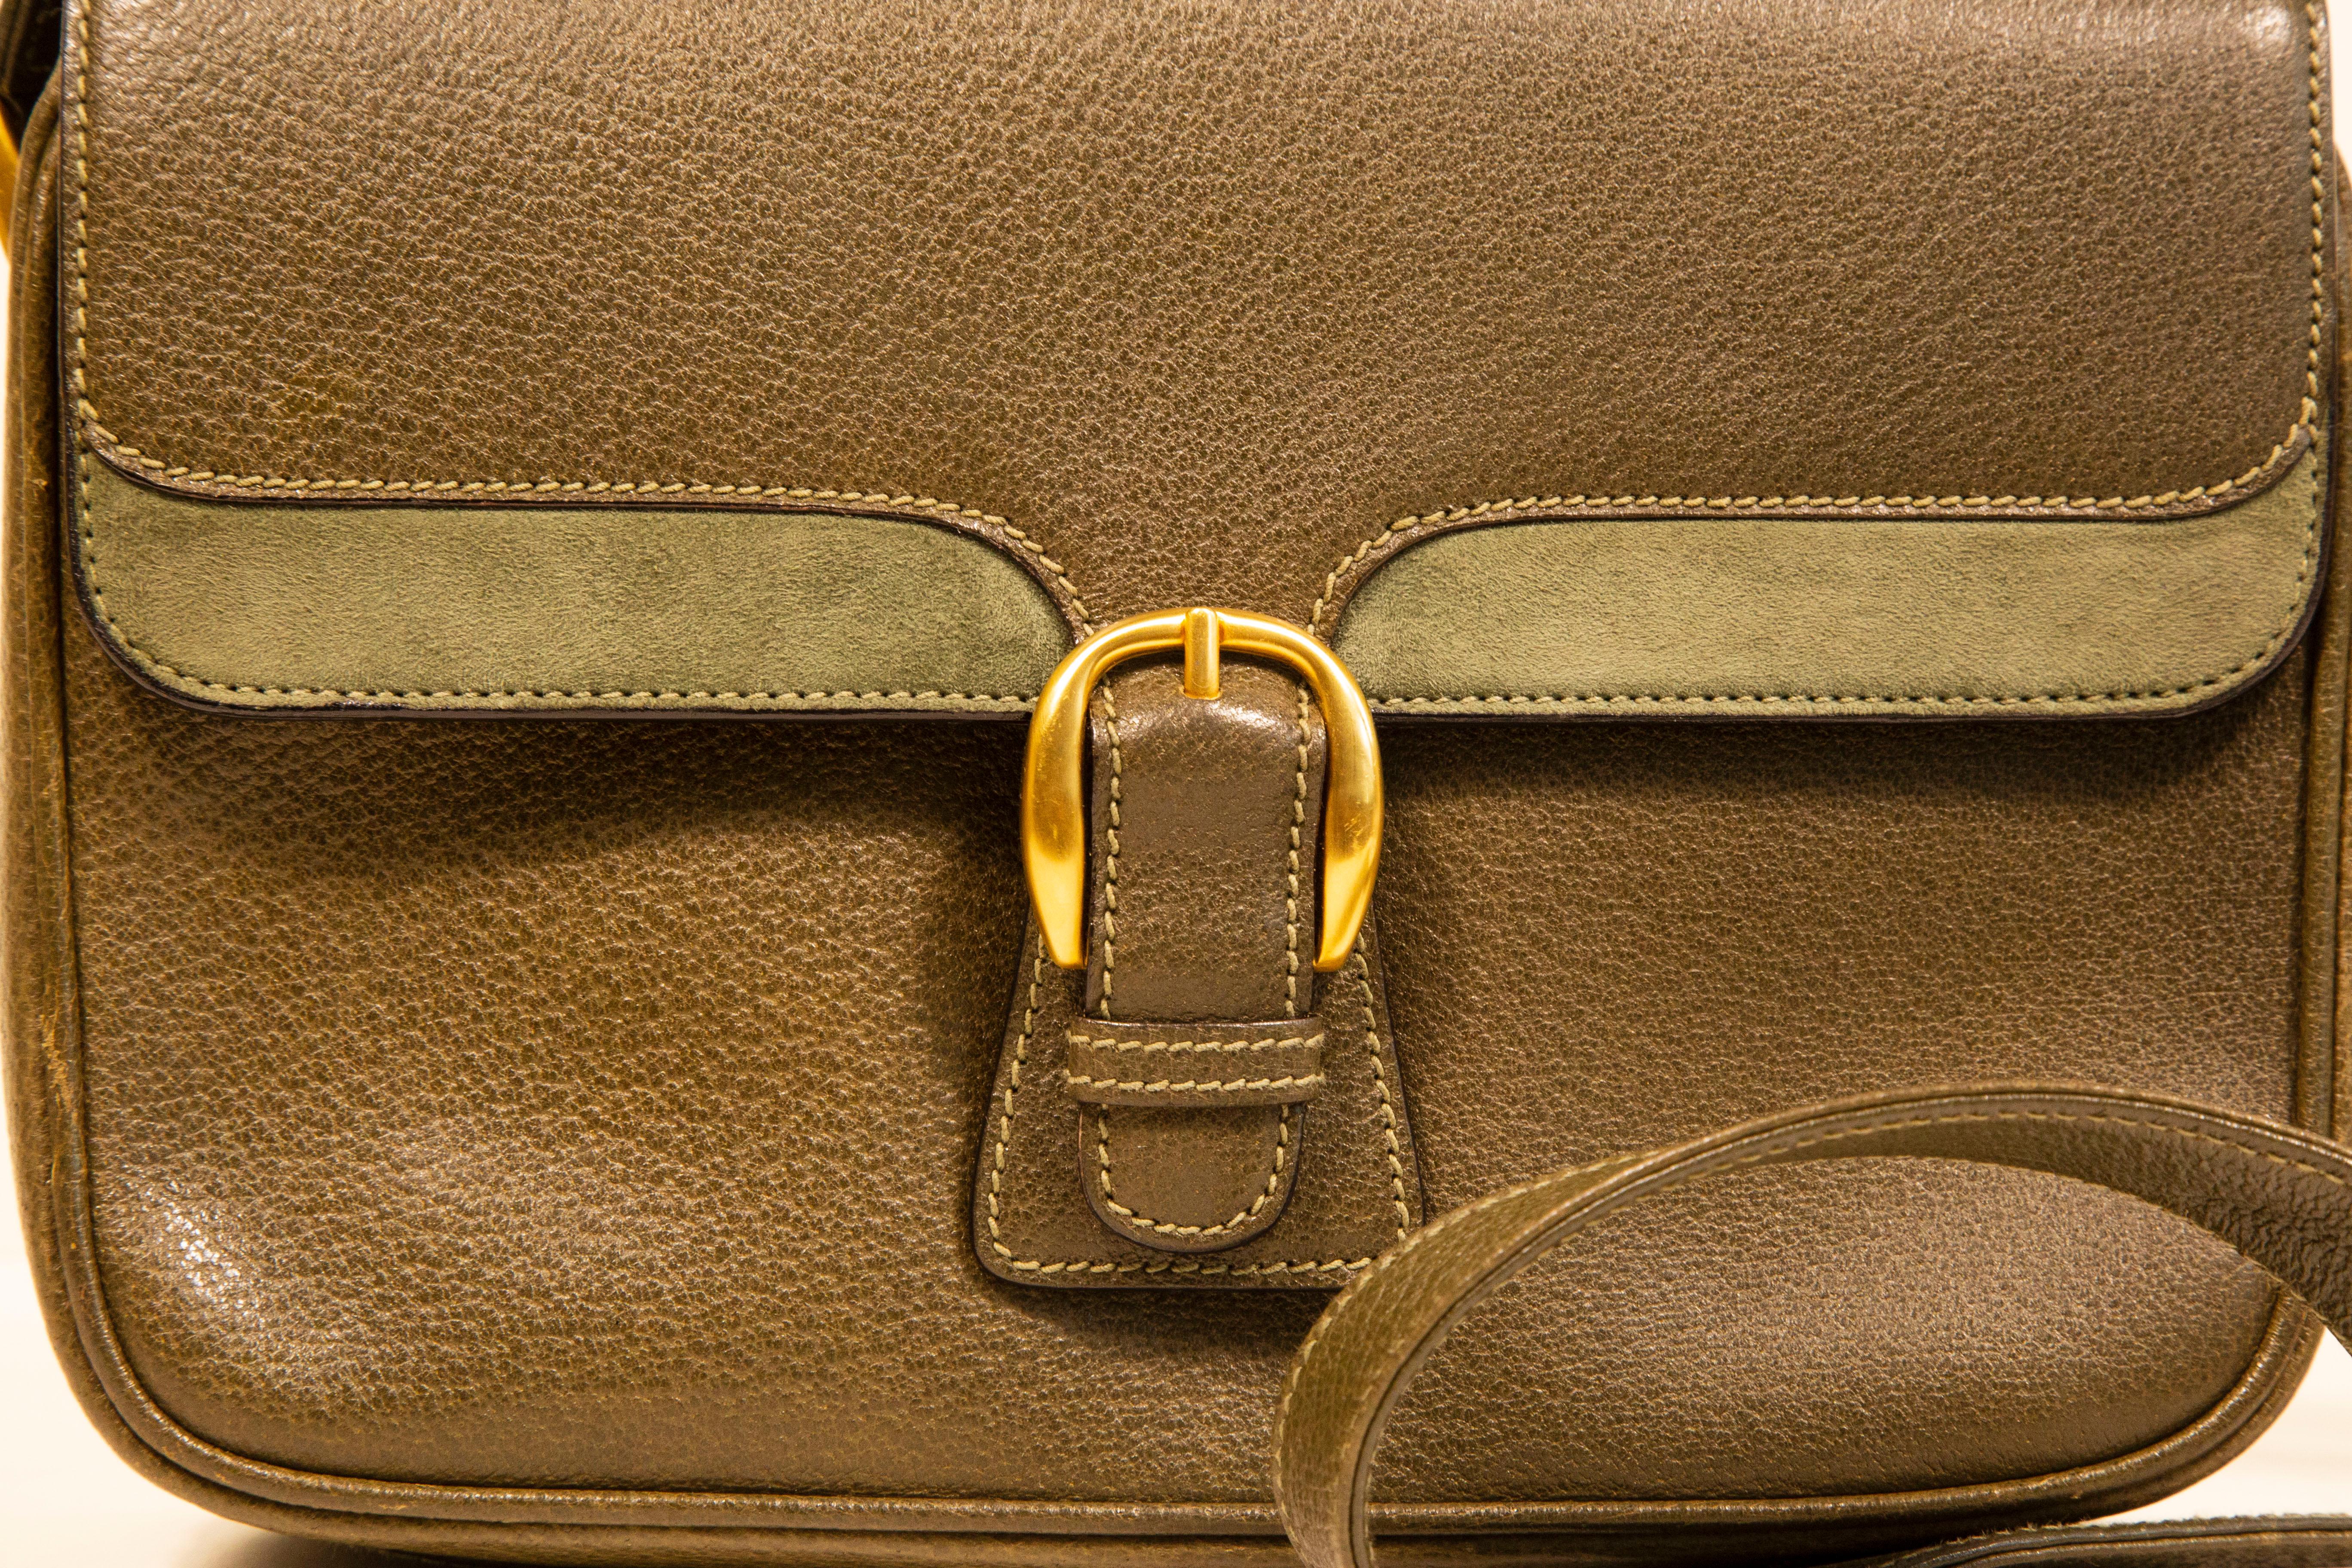 A vintage Gucci crossbody bag. The bag is made of olive green slightly textured leather with green suede application at the front flap, and gold toned hardware. The interior is lined with brown leather and next to the major compartment it features